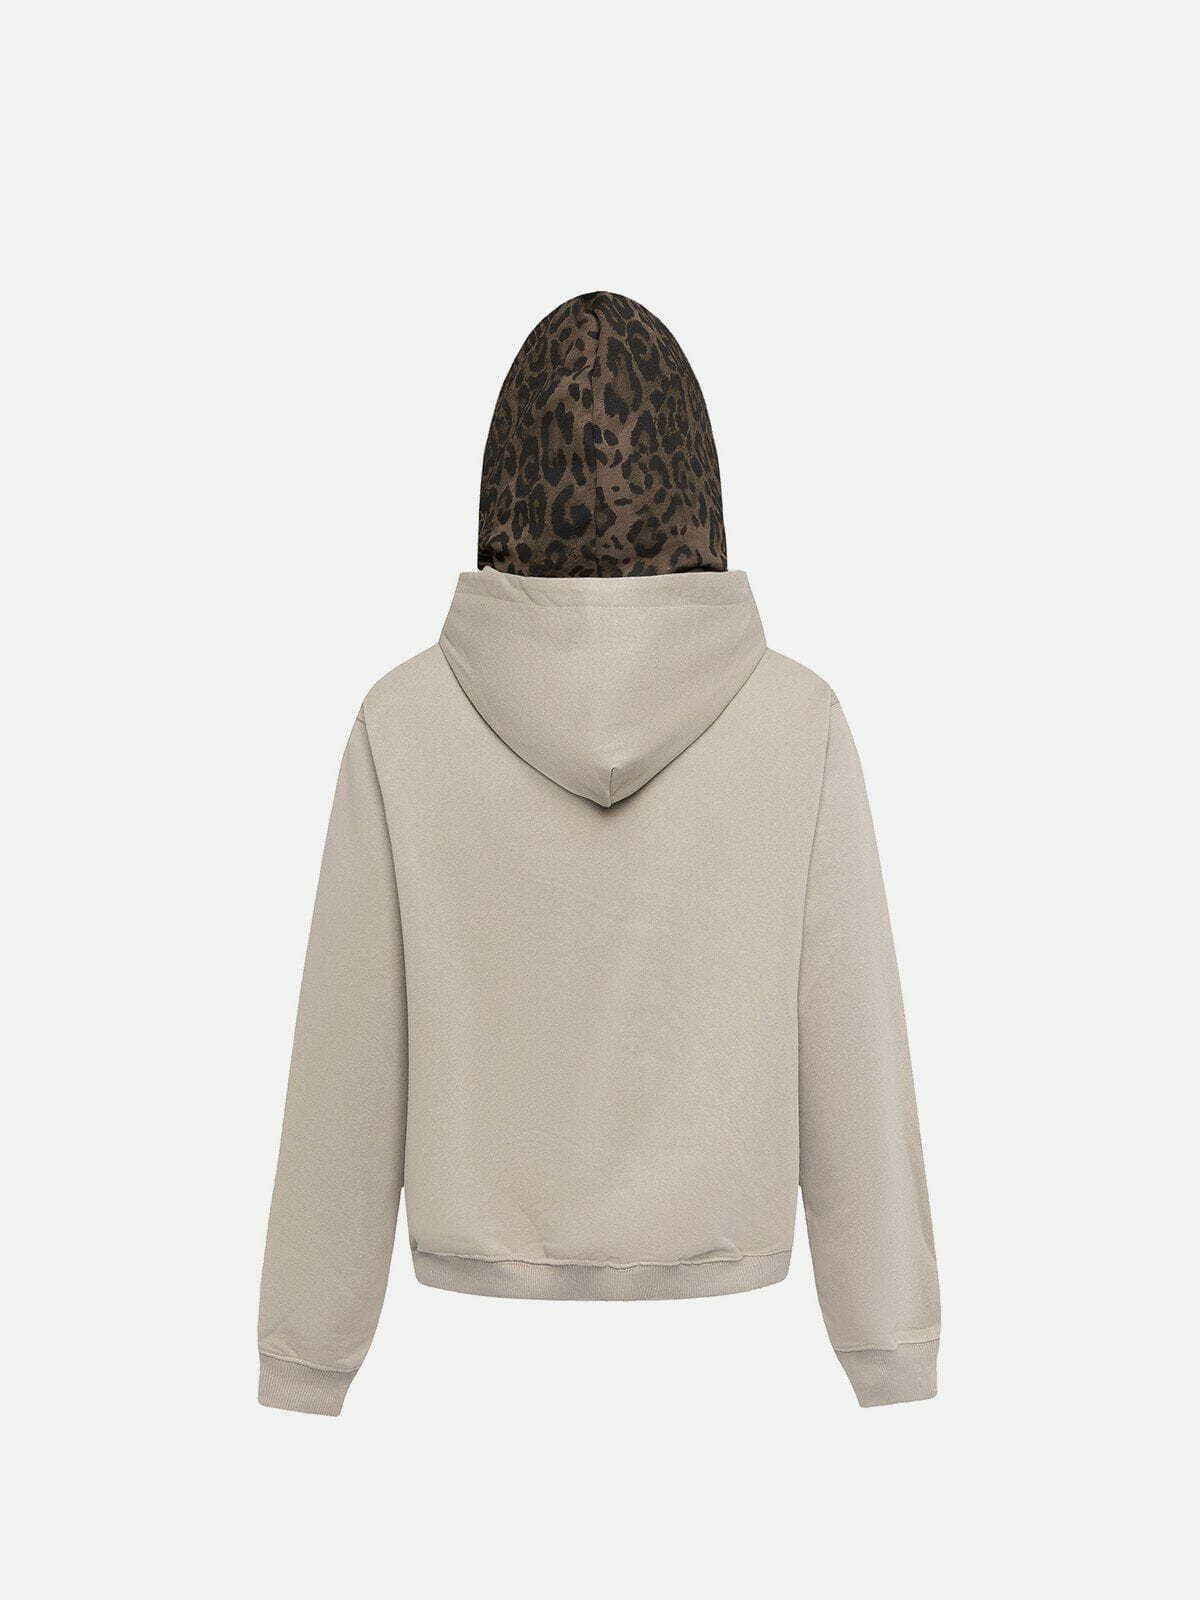 leopard print hoodie edgy graphic streetwear icon 6883